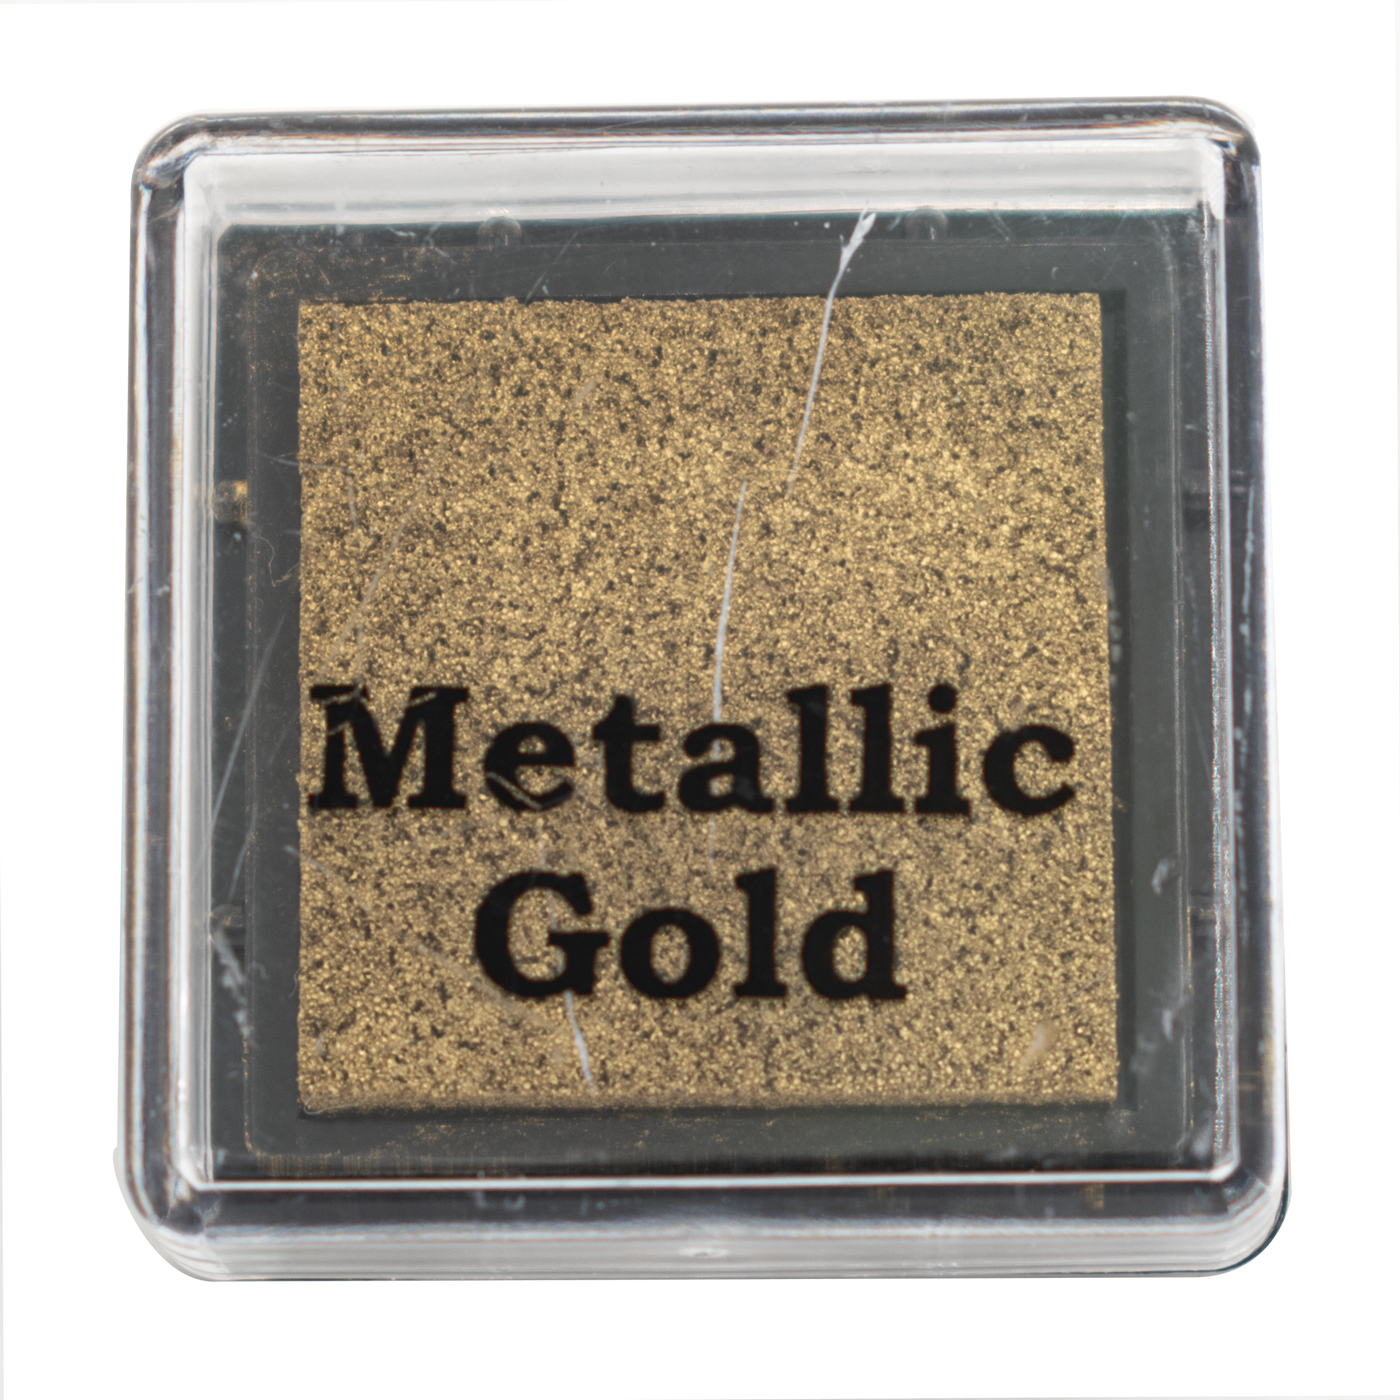 Global Solutions Metallic Gold Stamp Pad